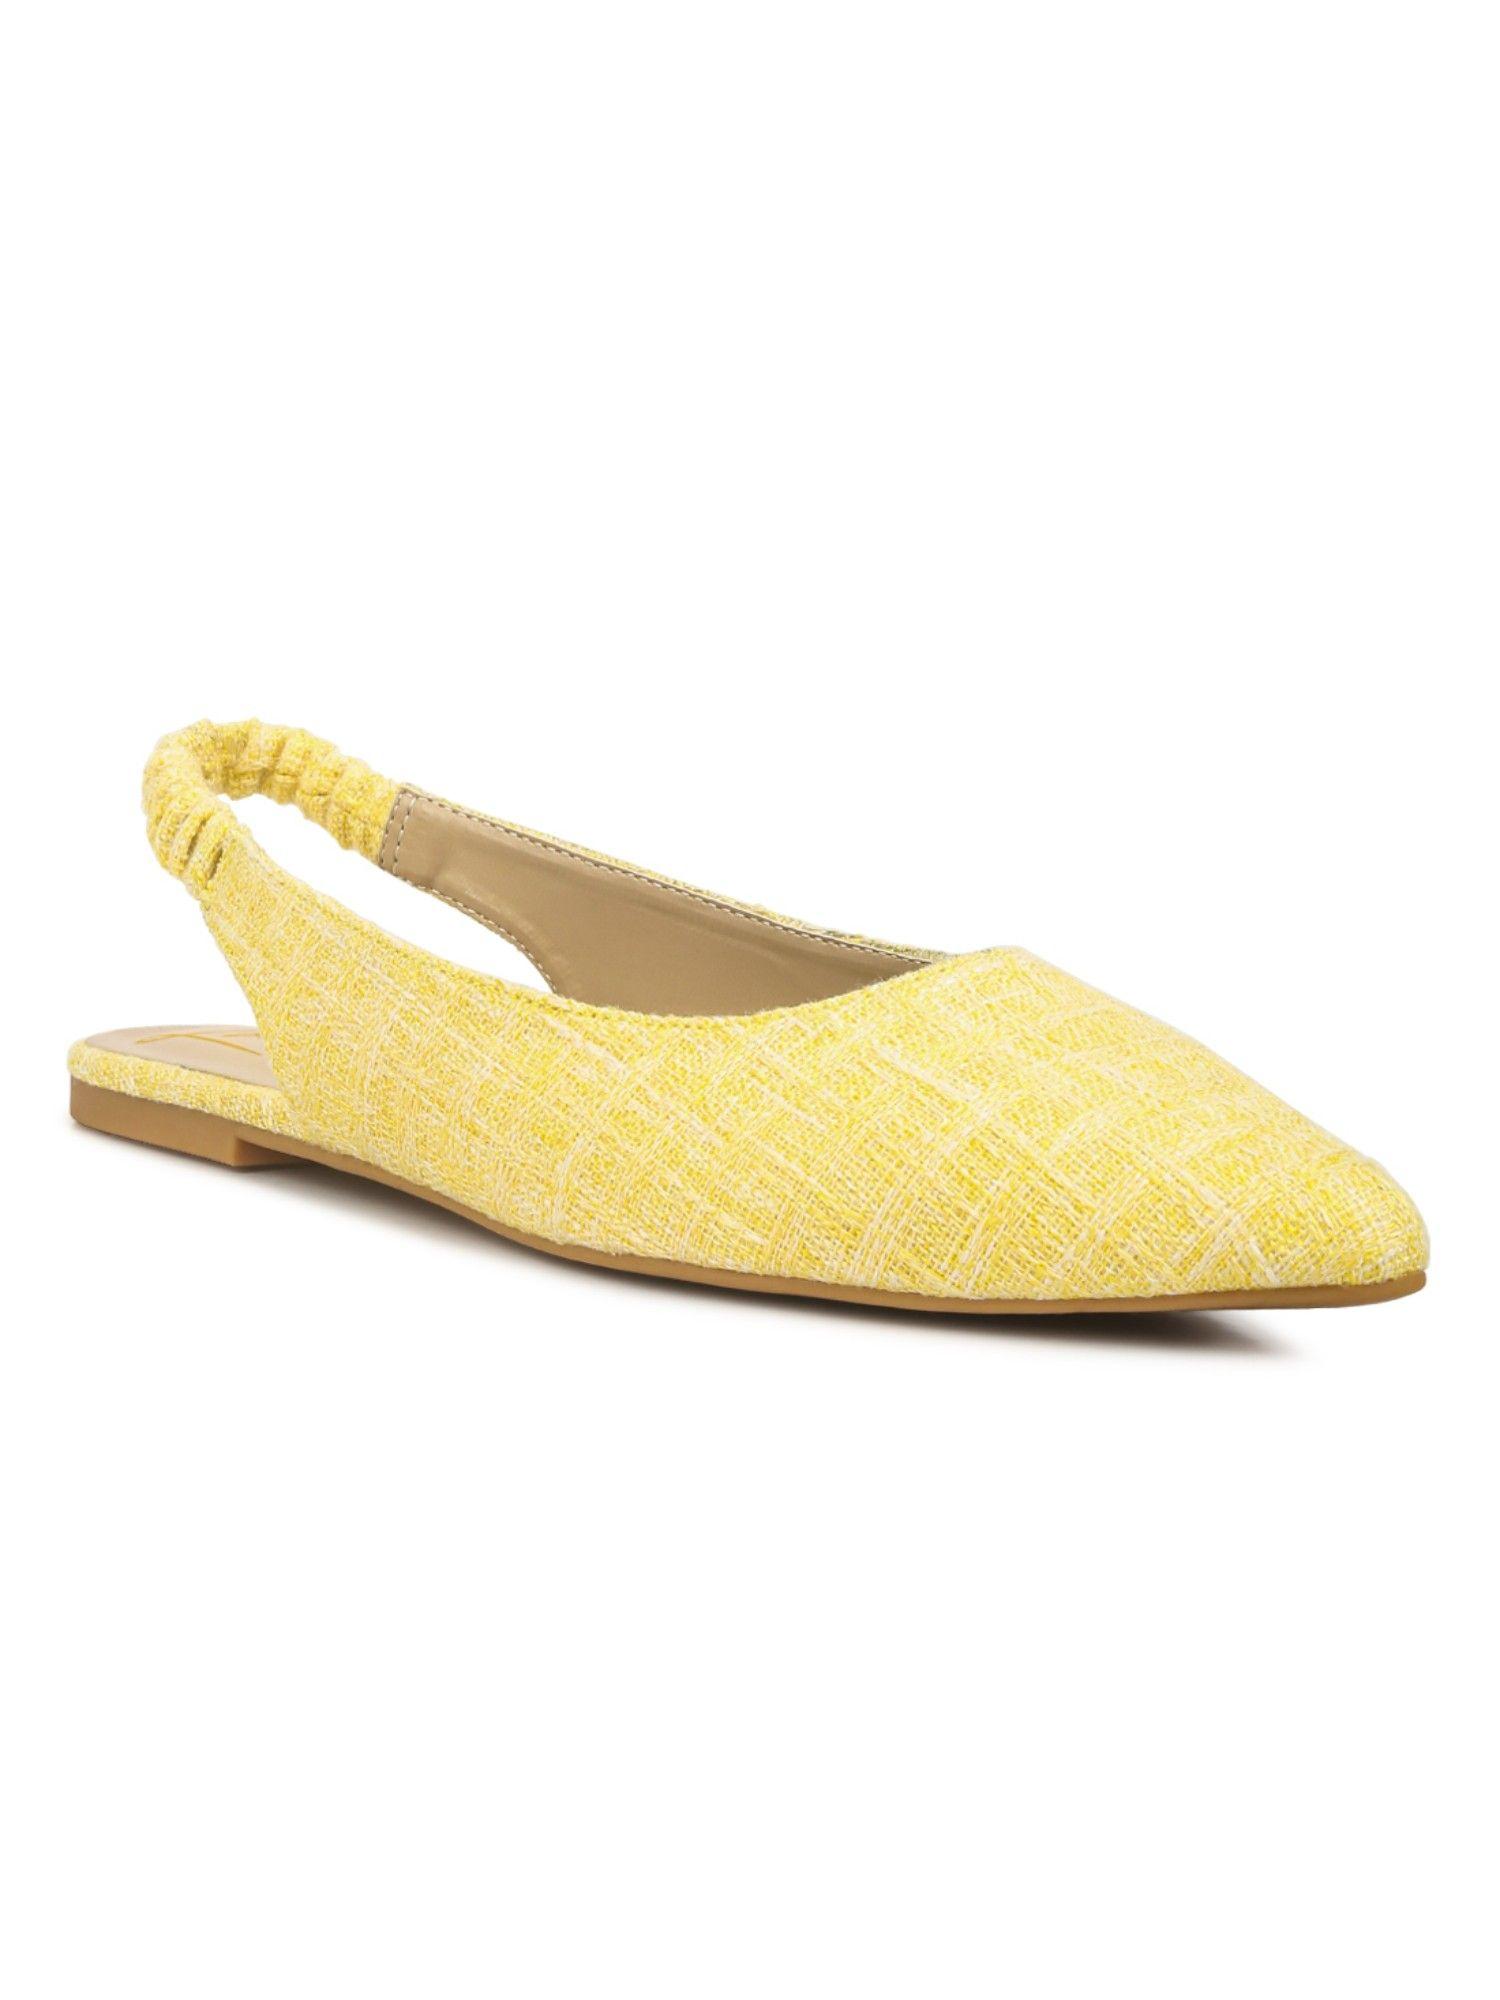 solid yellow ballet flats